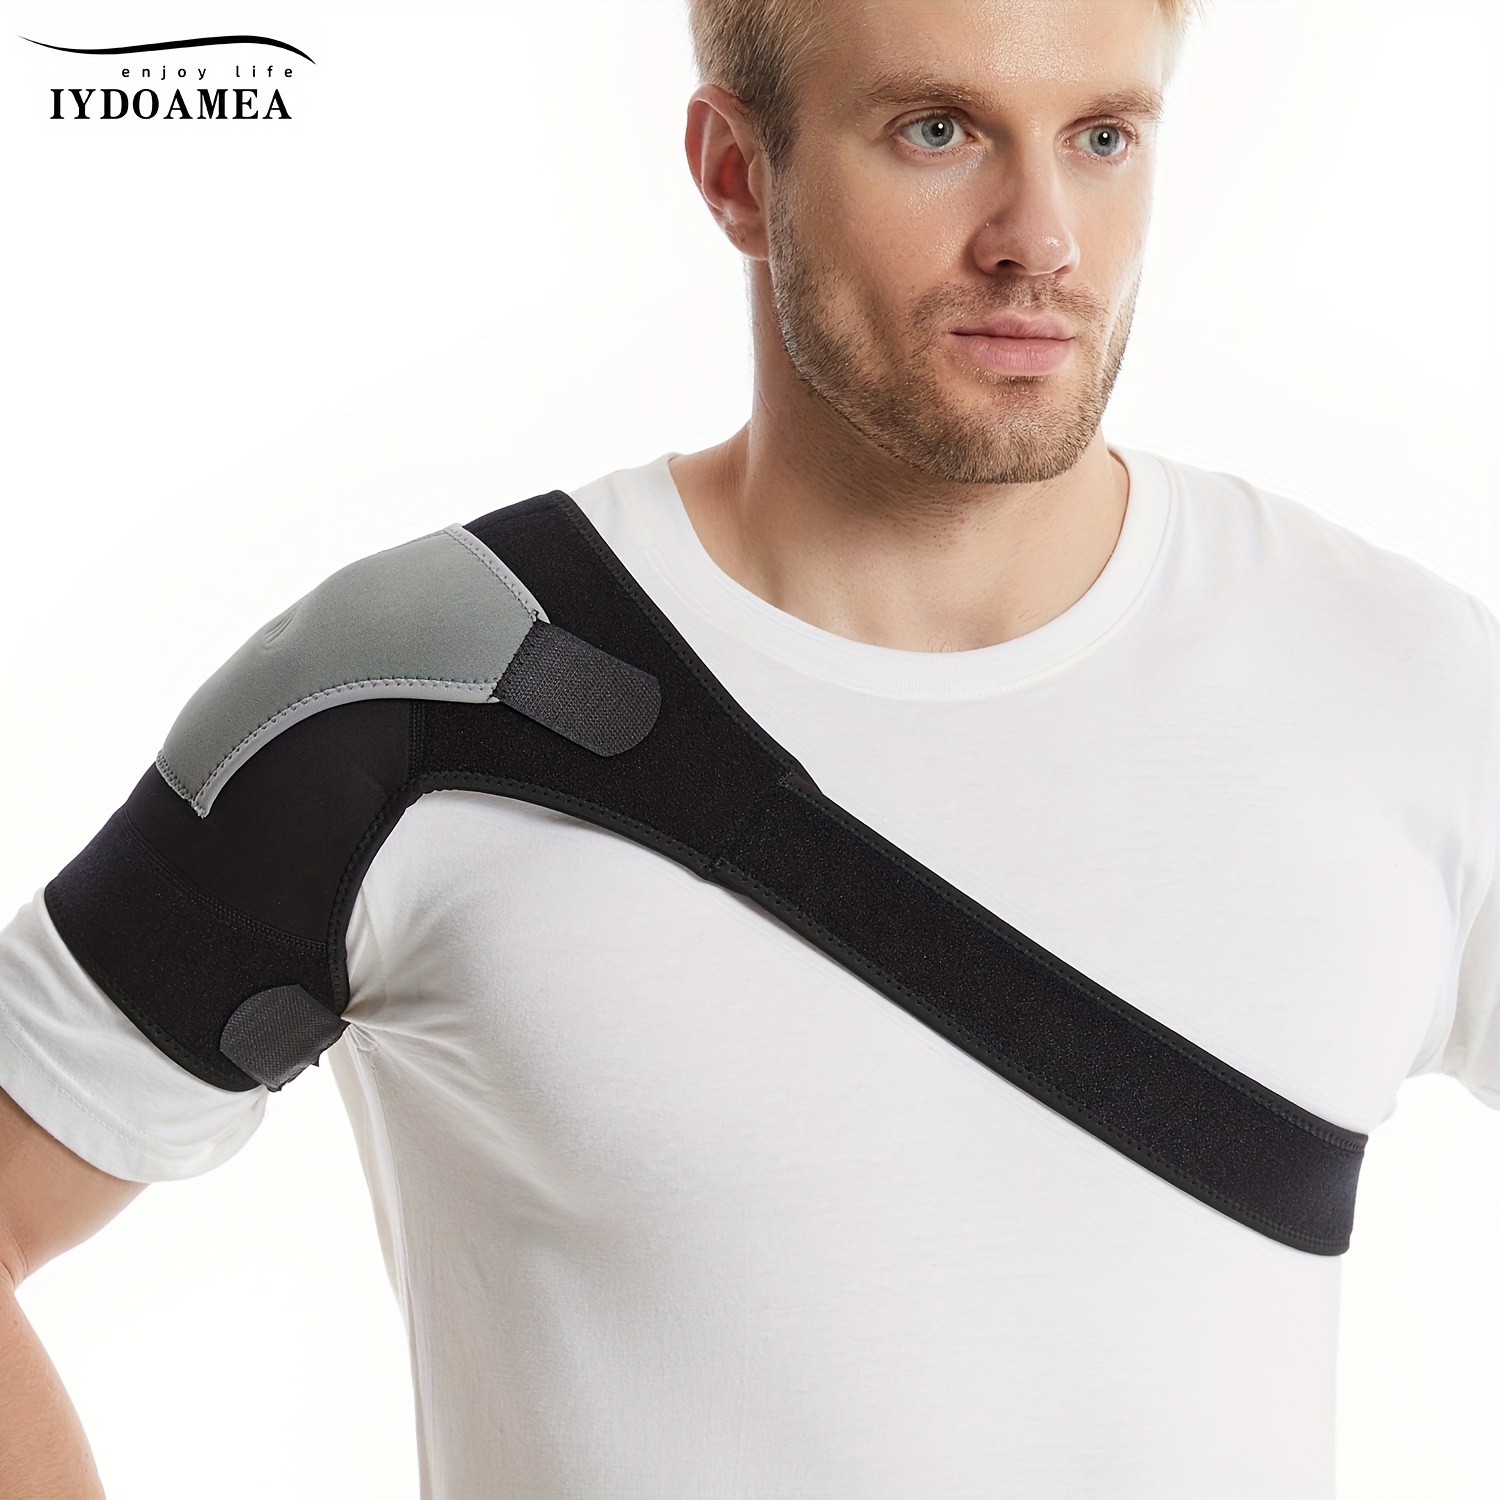 Shoulder Brace - Shoulder Compression Sleeve Immobilizer & Support Wrap for  Torn Rotator Cuff, Shoulder Pain, Dislocated AC Joint, Tendonitis